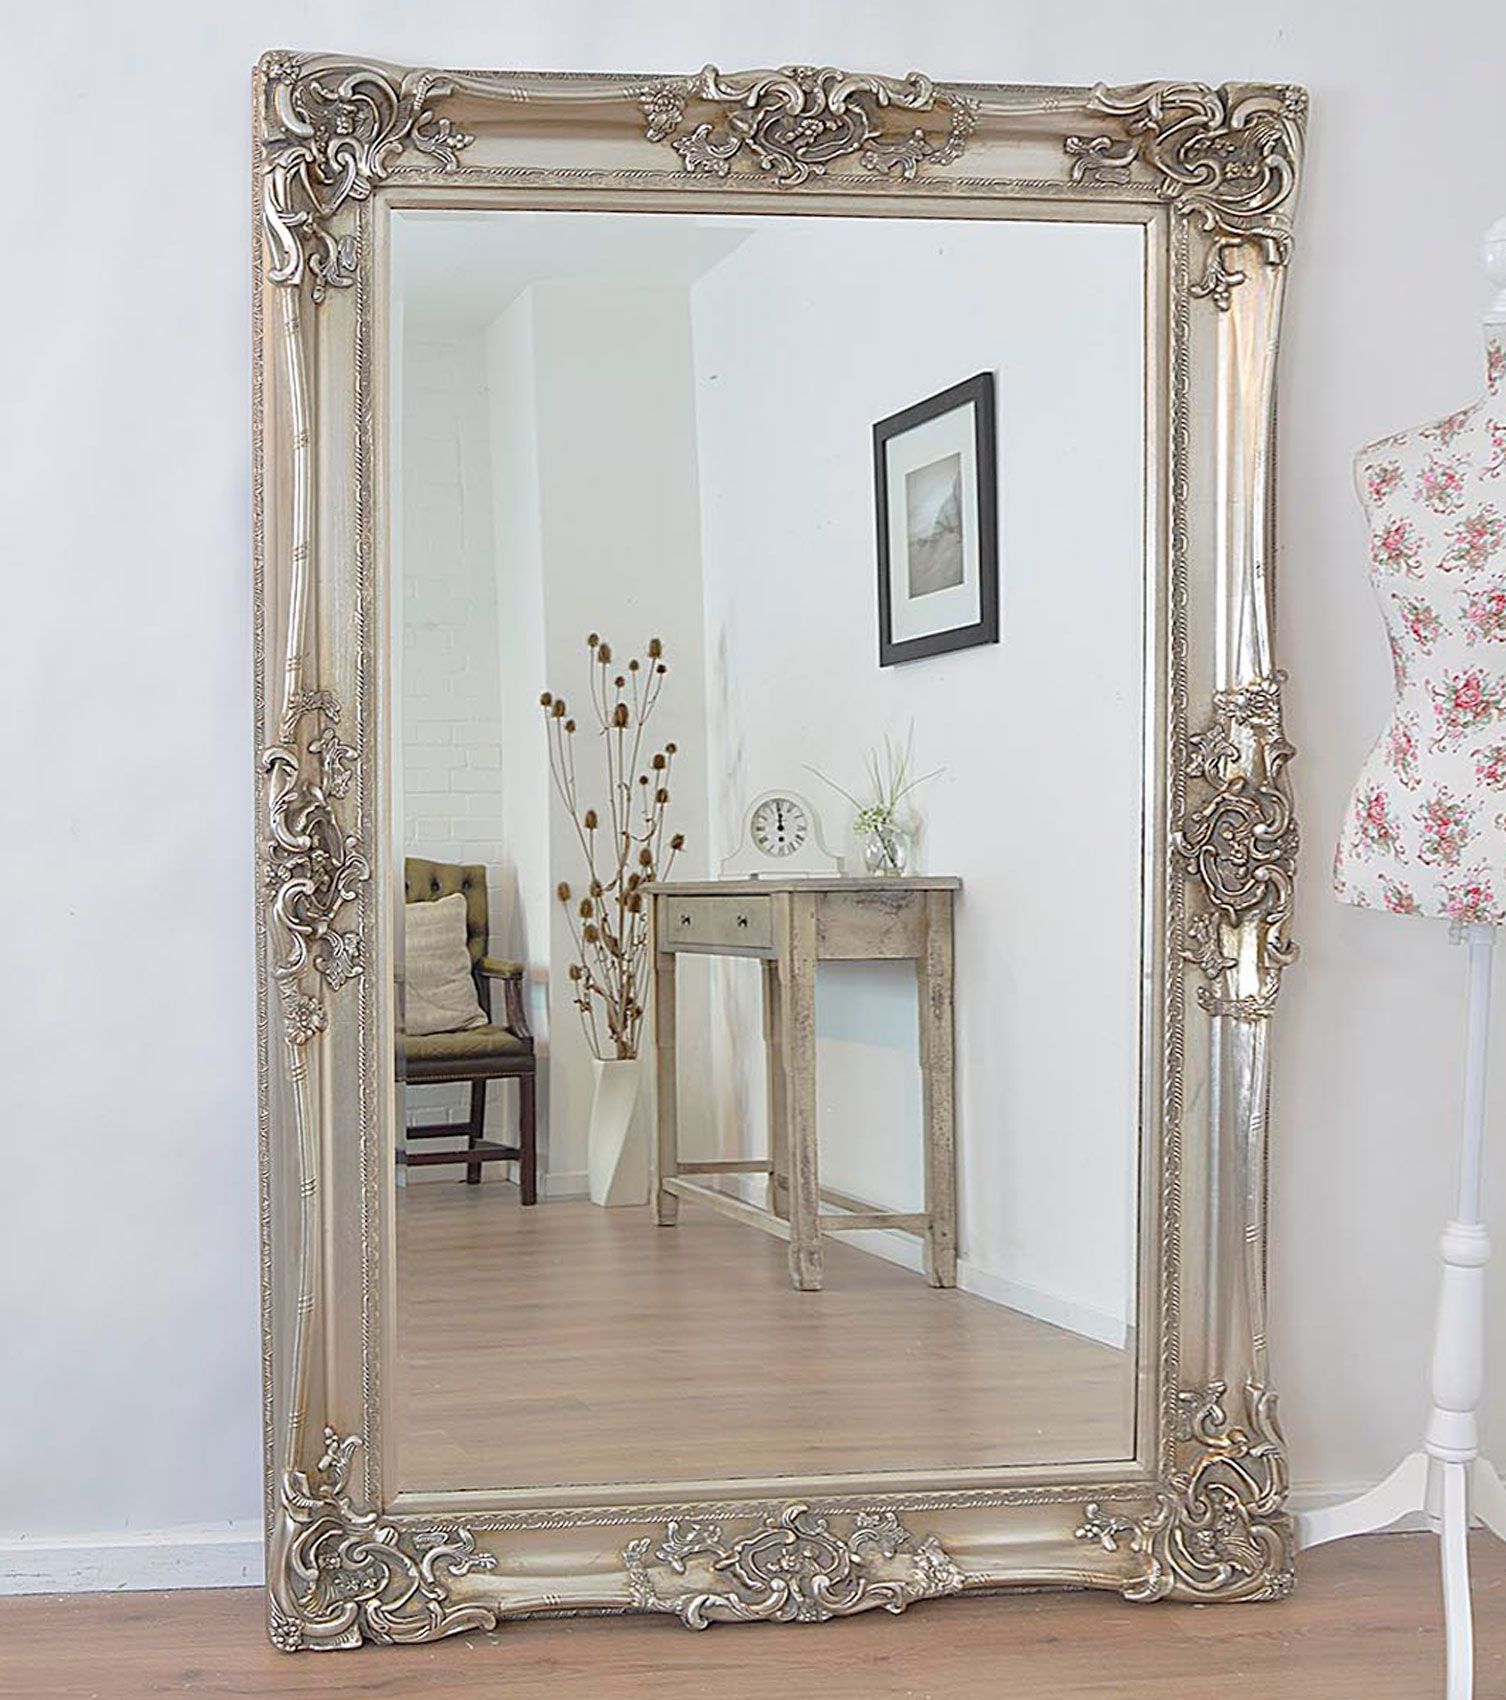 Antique Design Ornate Wall Mirror Will Make A Beautiful Addition To Any For High Wall Mirrors (View 7 of 15)